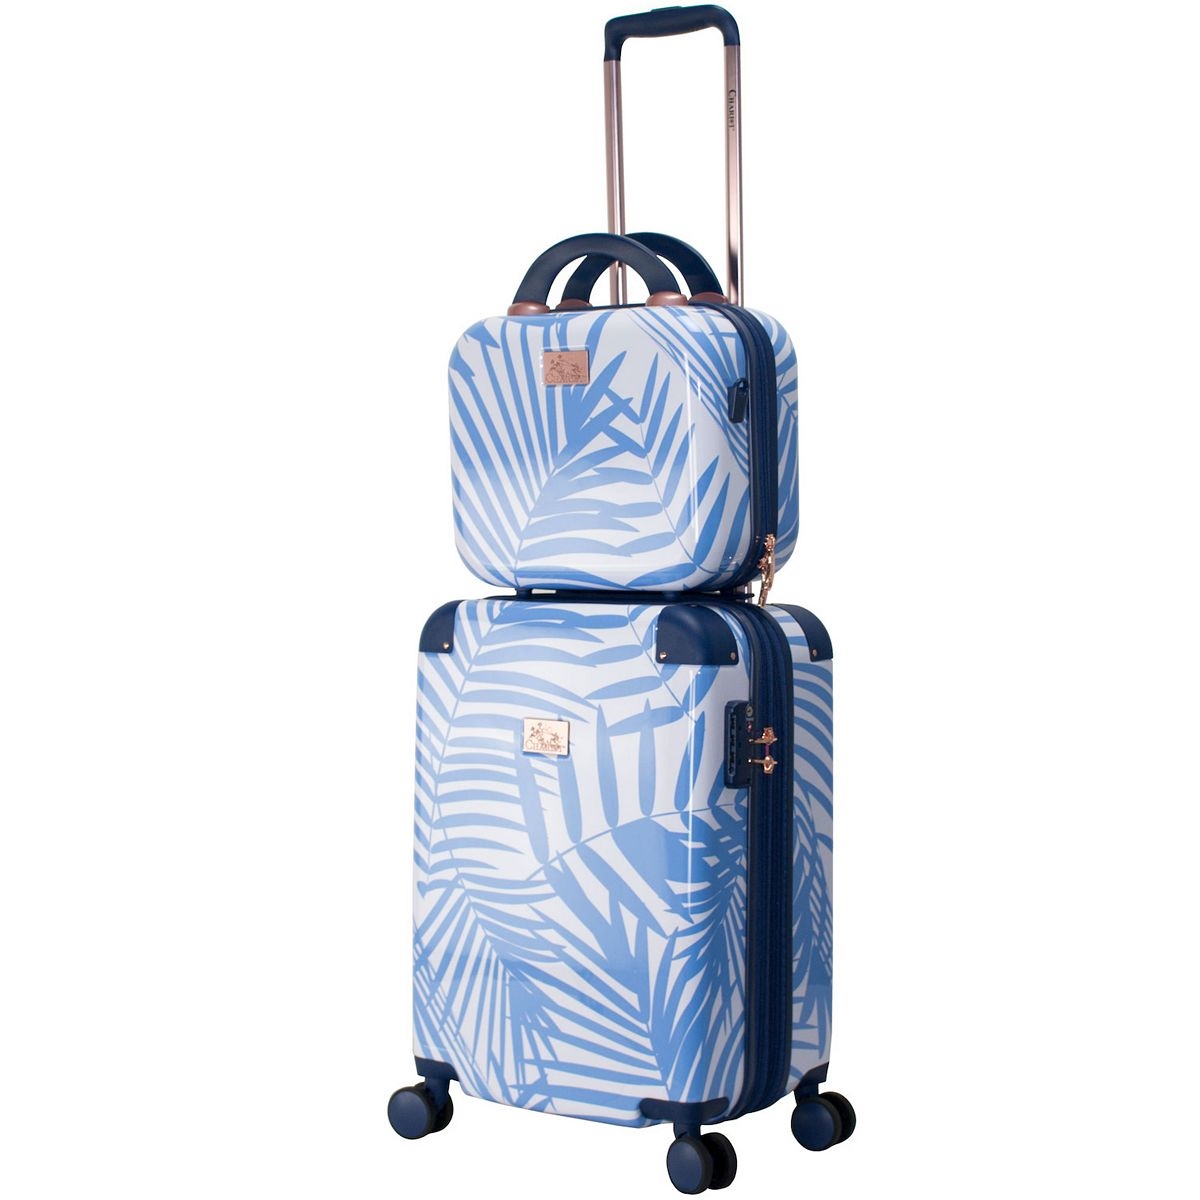 Picture of Chariot CHP-903- 2-PC-FERN Chariot  Park Avenue Hardside 2-Piece Carry-On Spinner Luggage Set - Fern